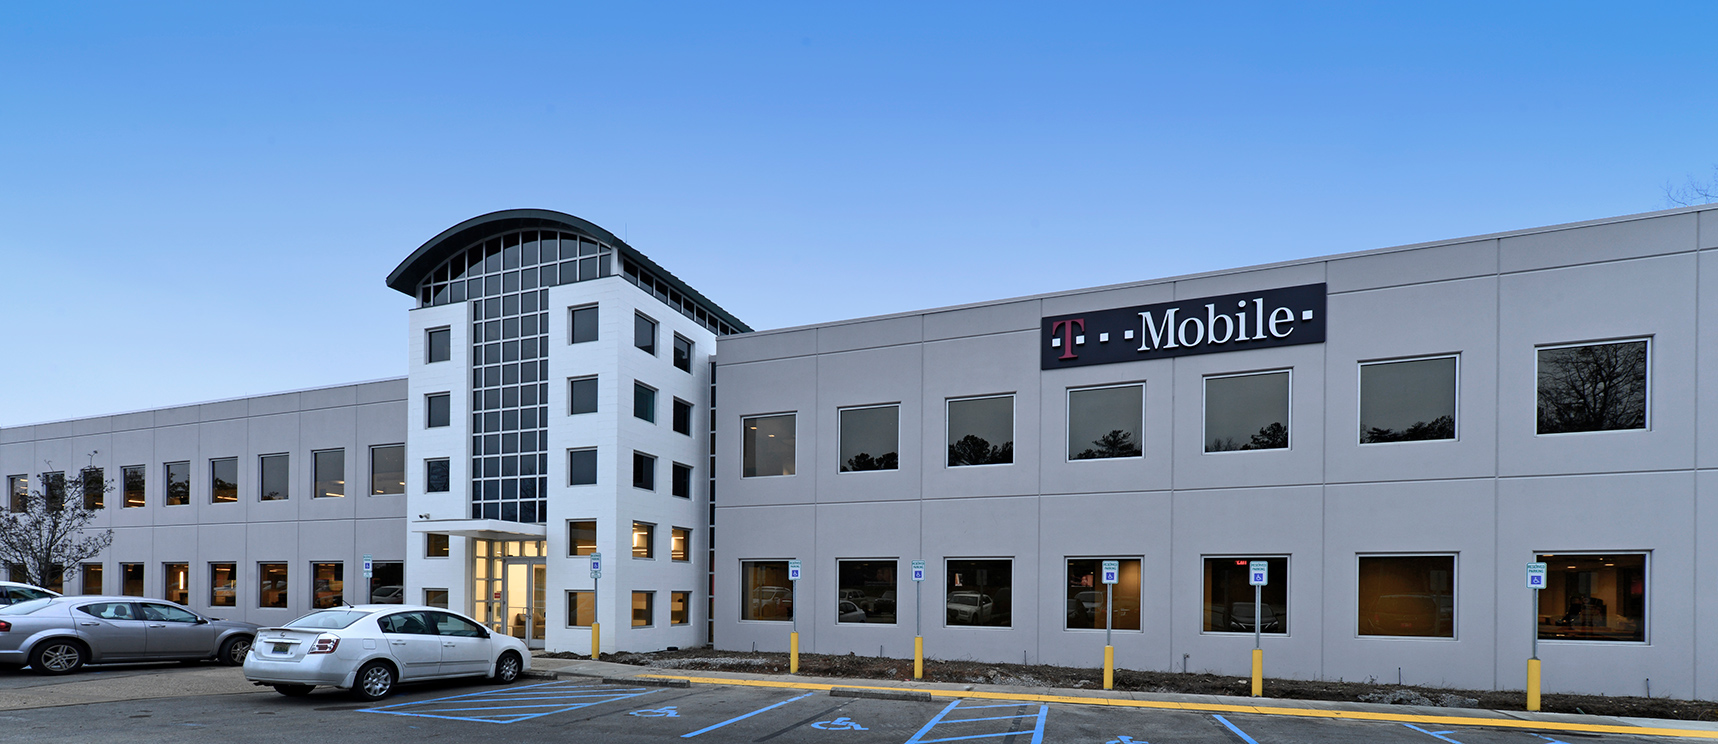 Exterior view of T Mobile Corporate Office